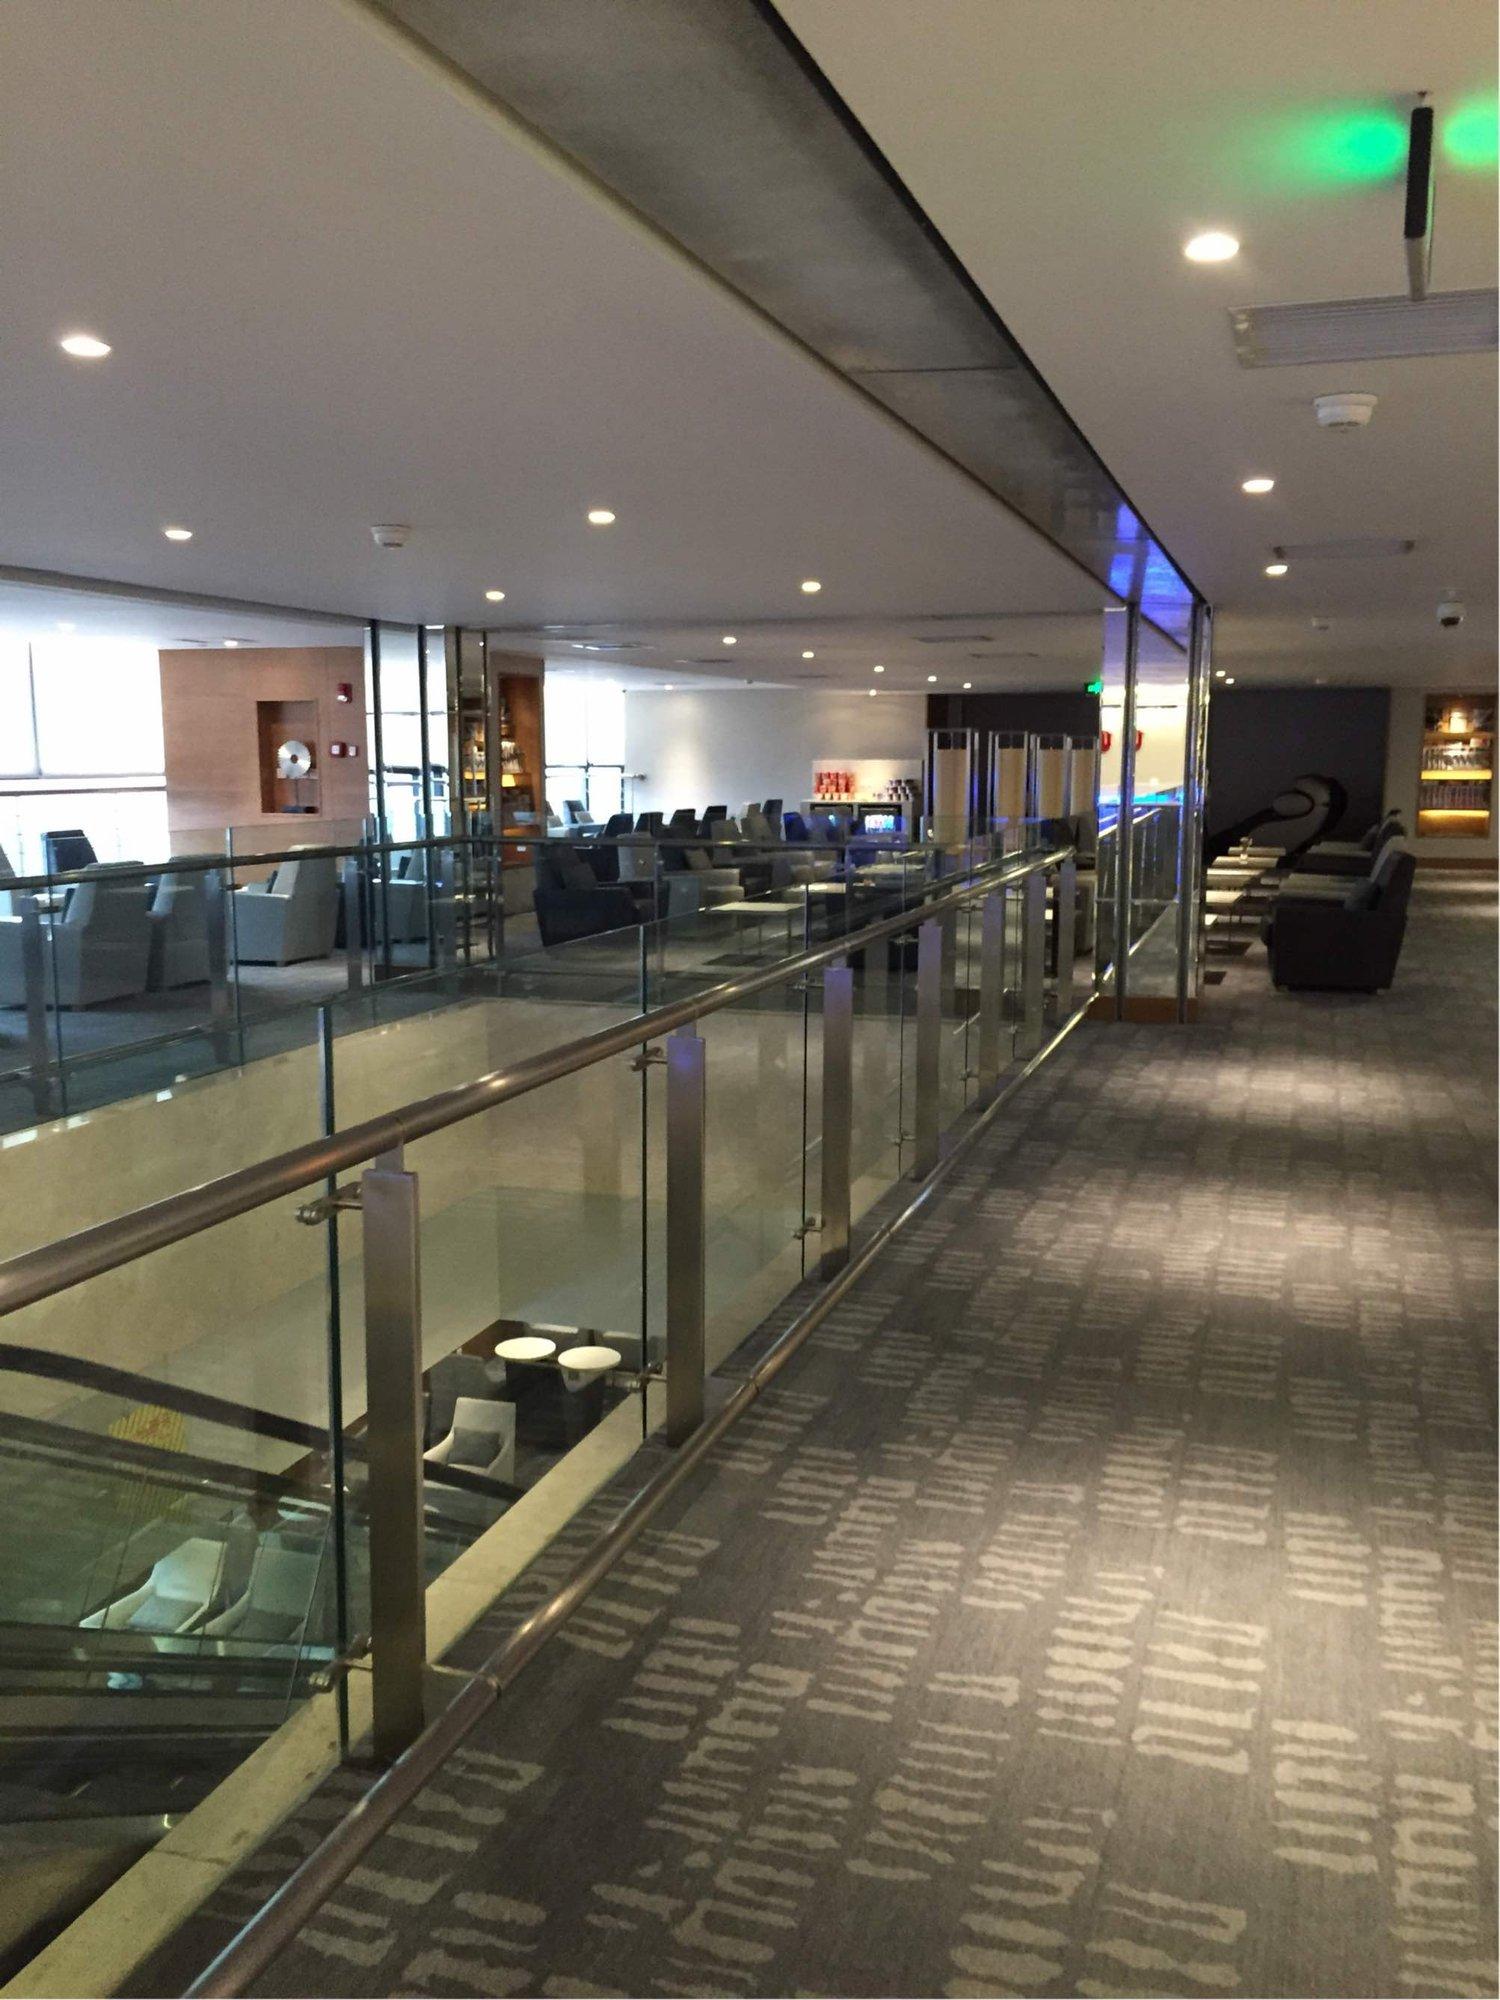 No. 71 Air China Business Class Lounge image 1 of 9